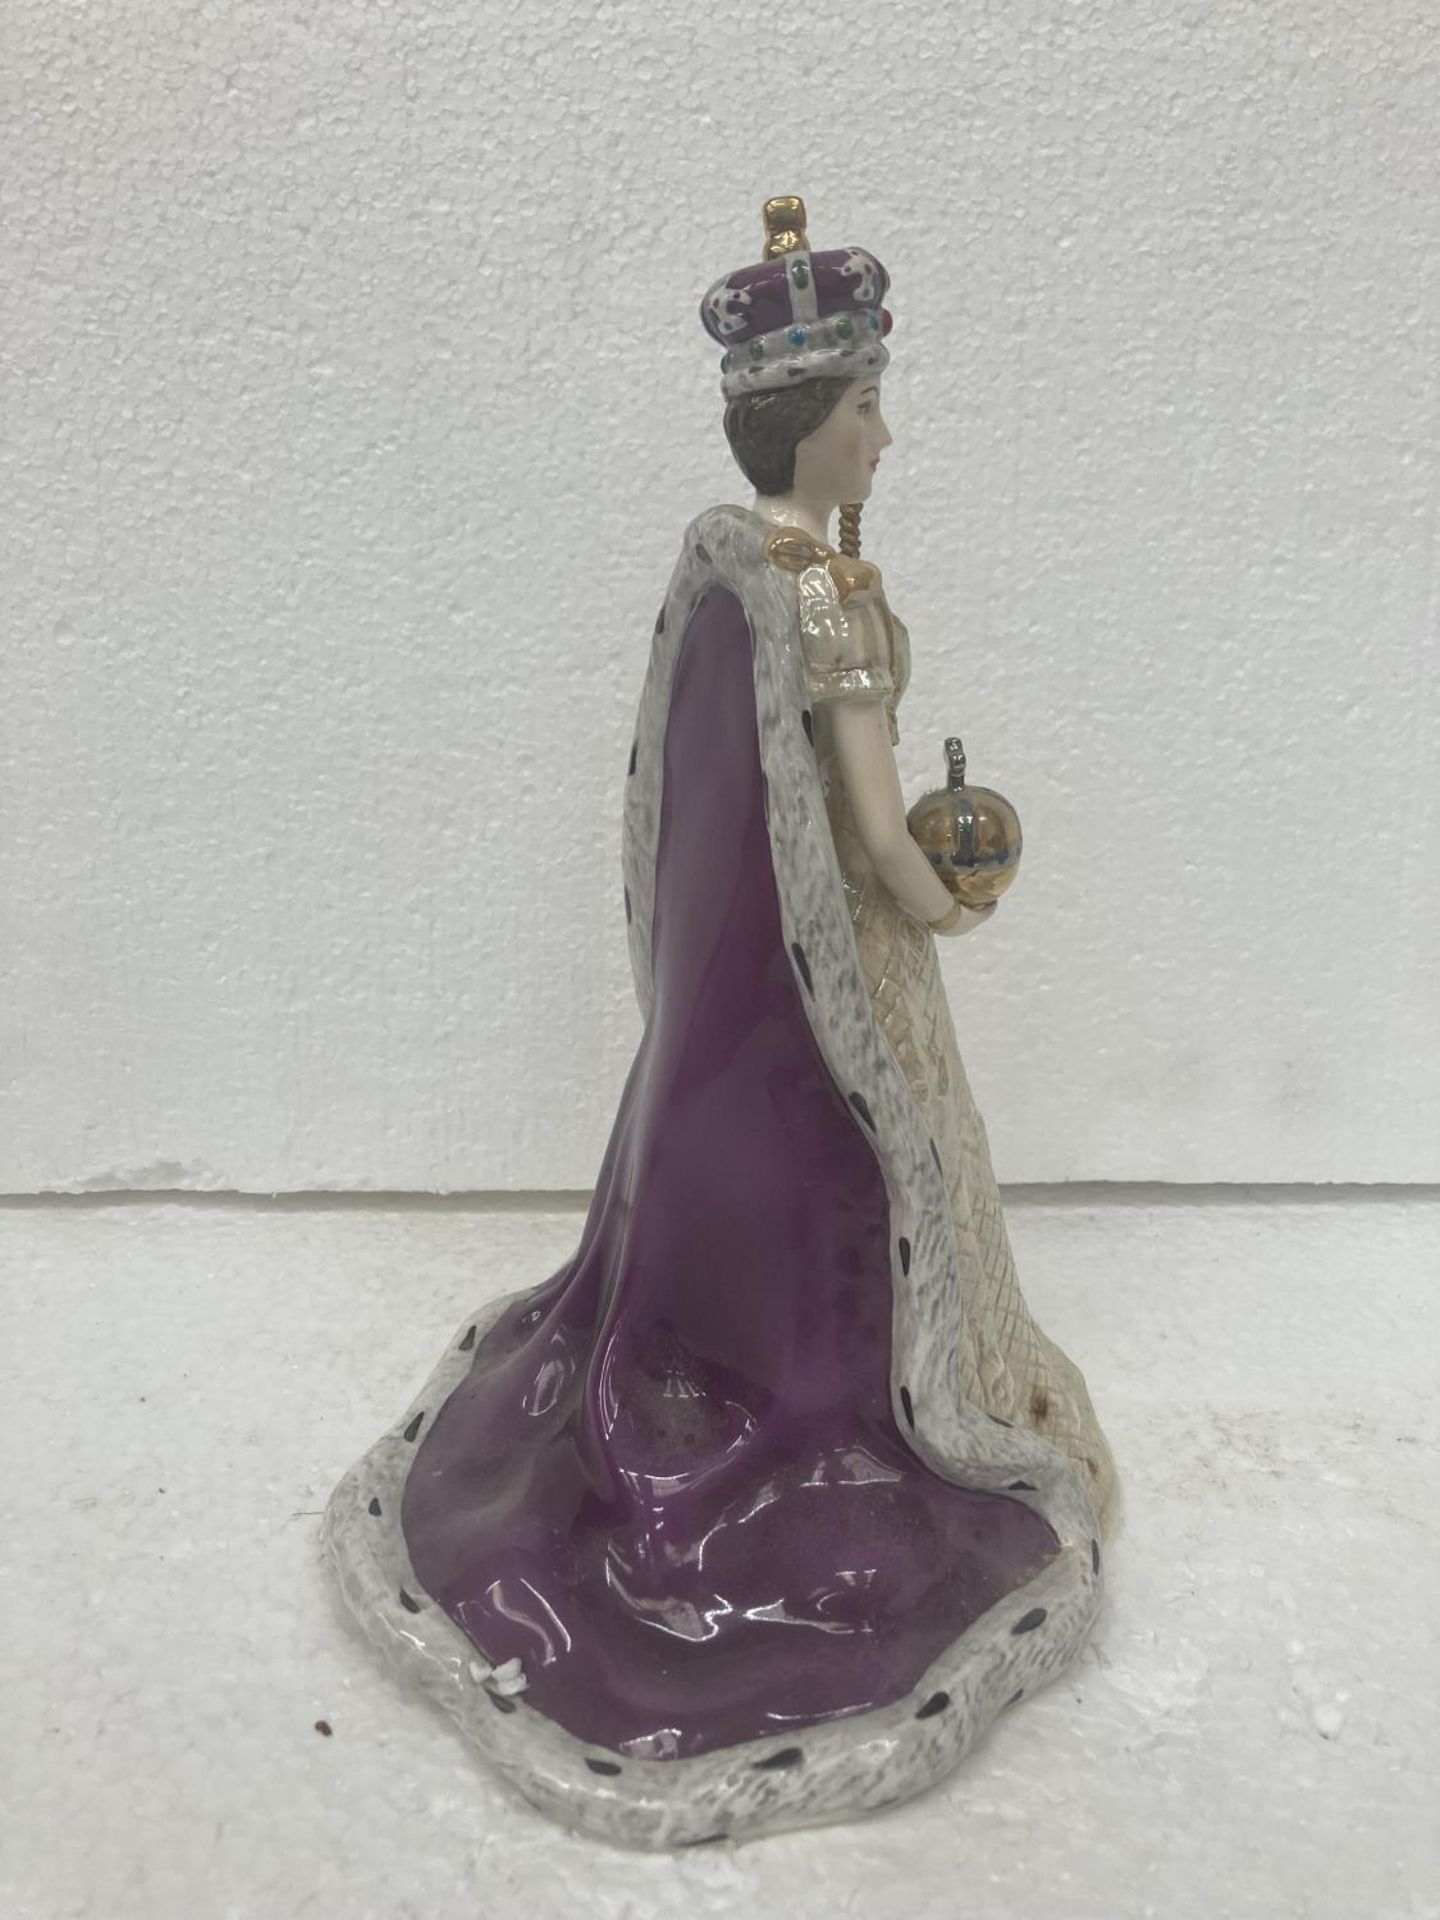 A SPODE FIGURINE OF QUEEN ELIZABETH II - THE DIAMOND JUBILEE 2012 LIMITED EDITION OF 4995 - 24 CM - Image 3 of 7